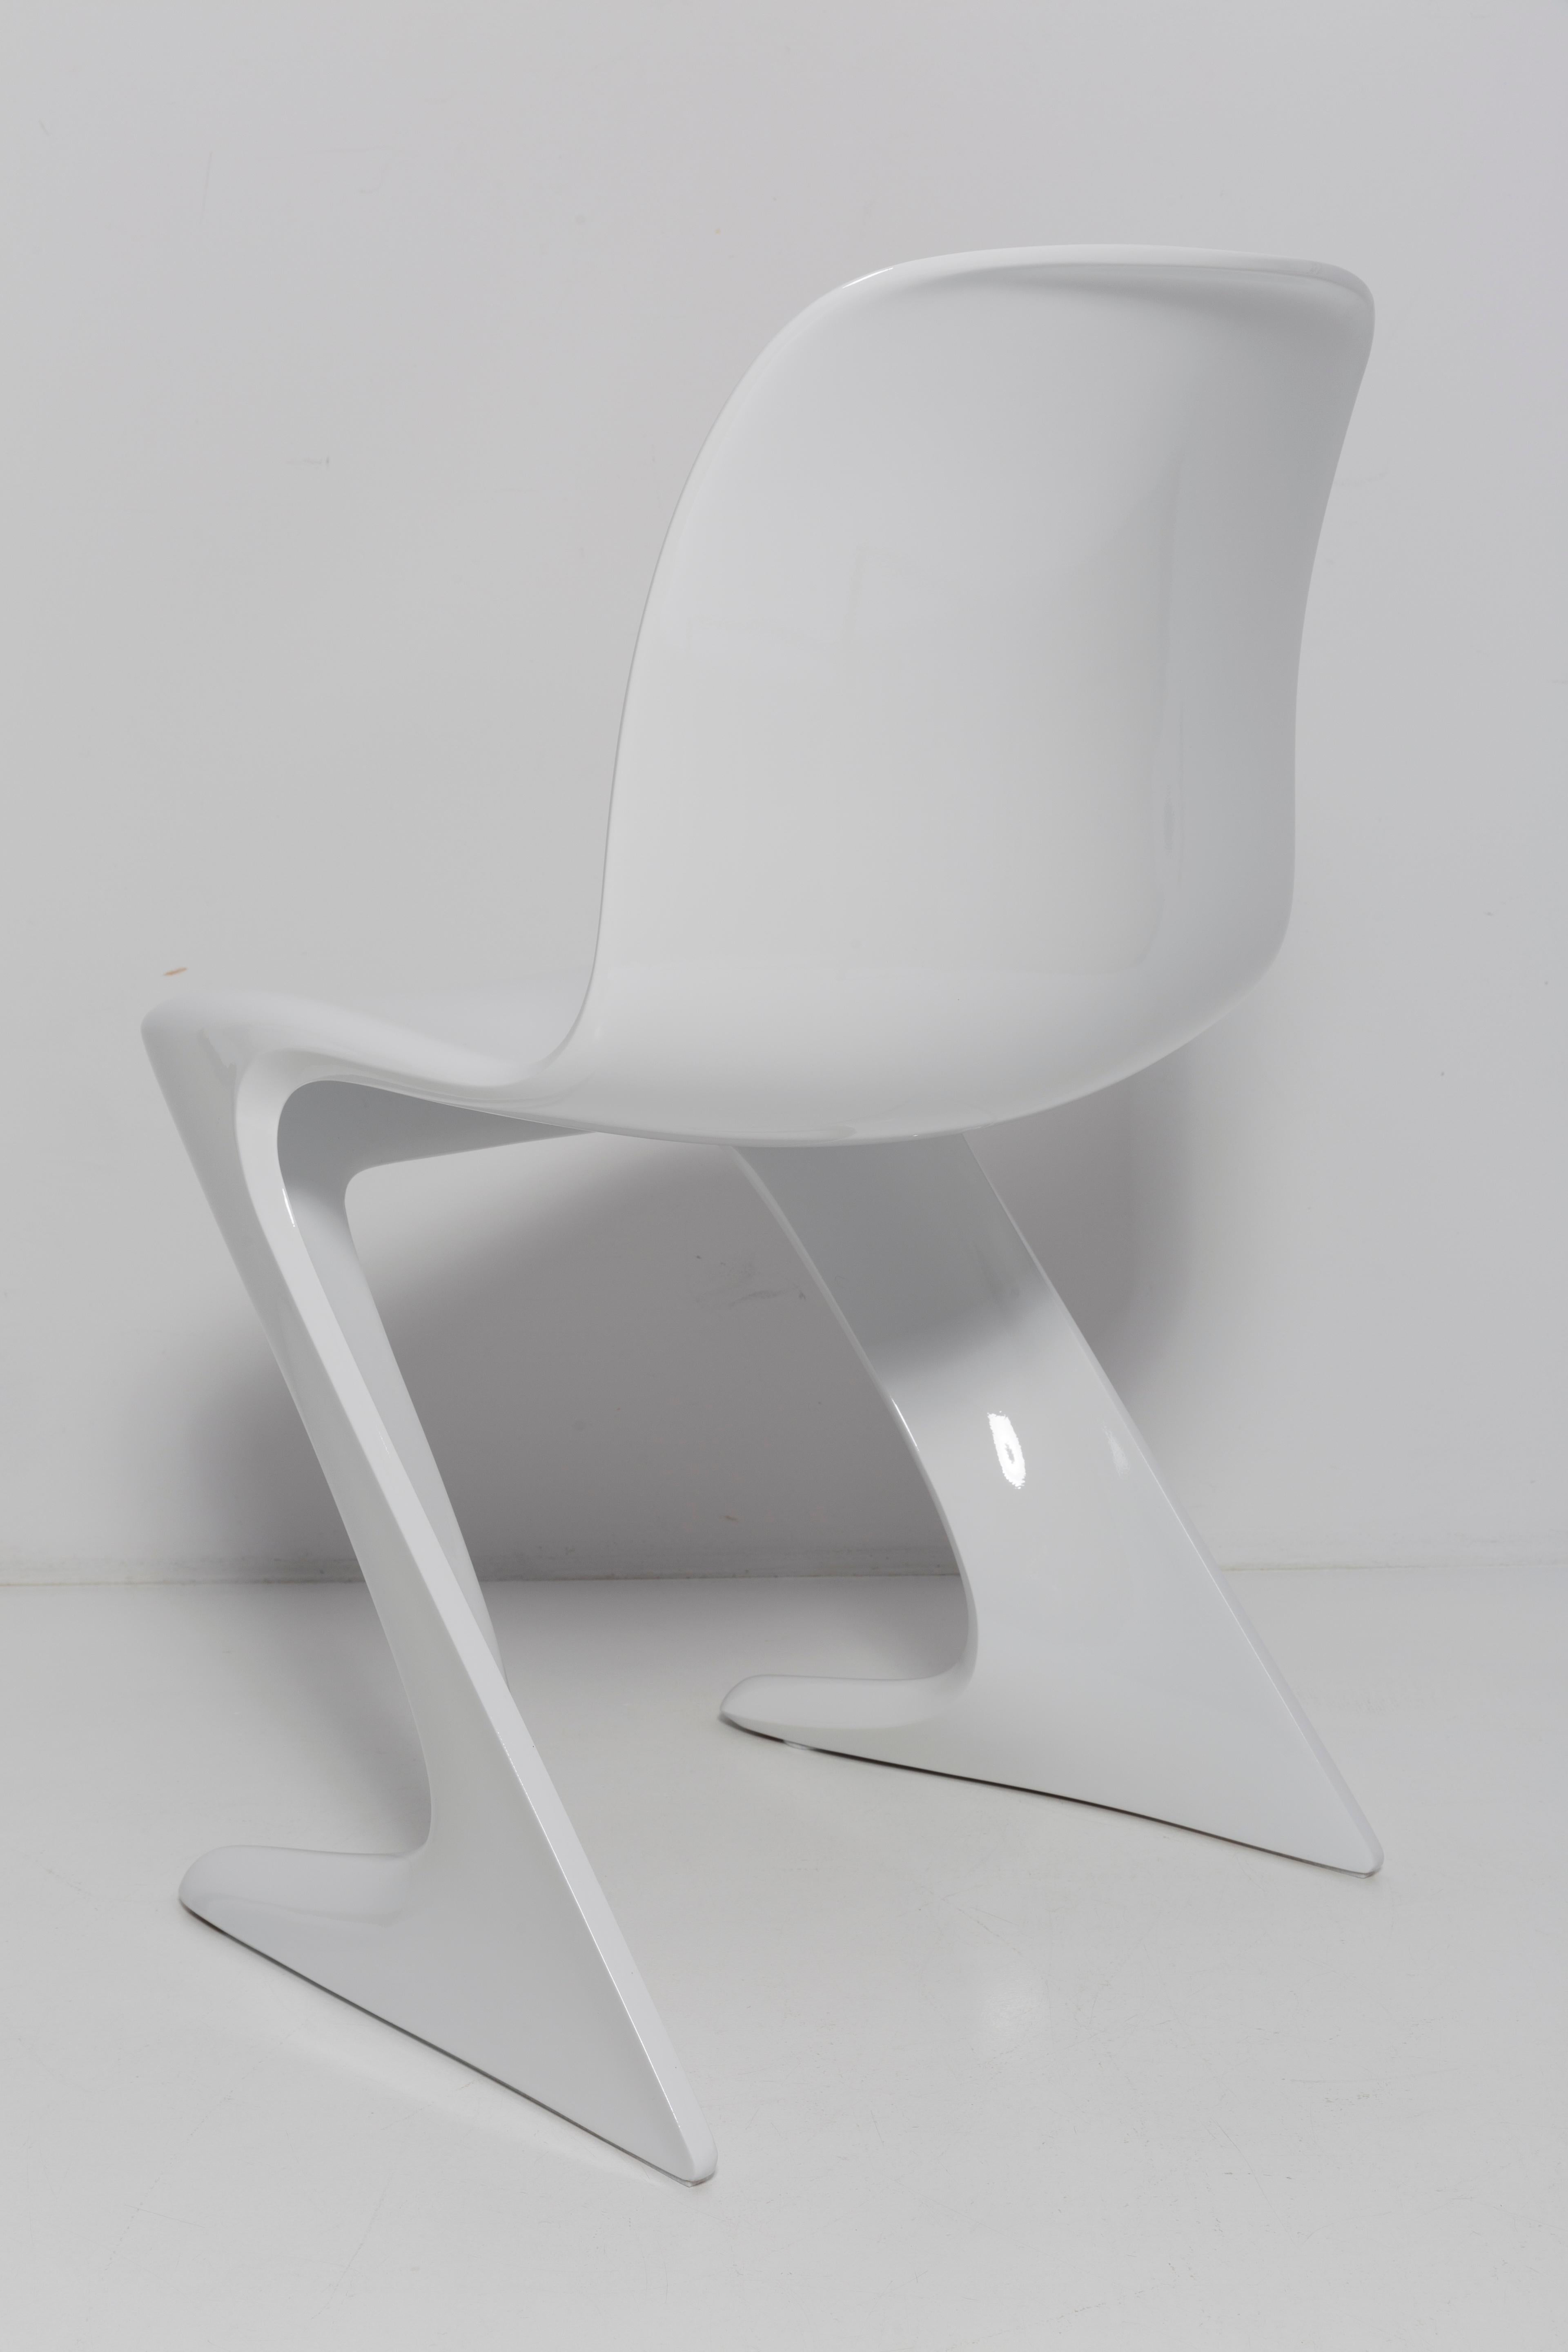 White Glossy Kangaroo Chair Designed by Ernst Moeckl, Germany, 1960s For Sale 3